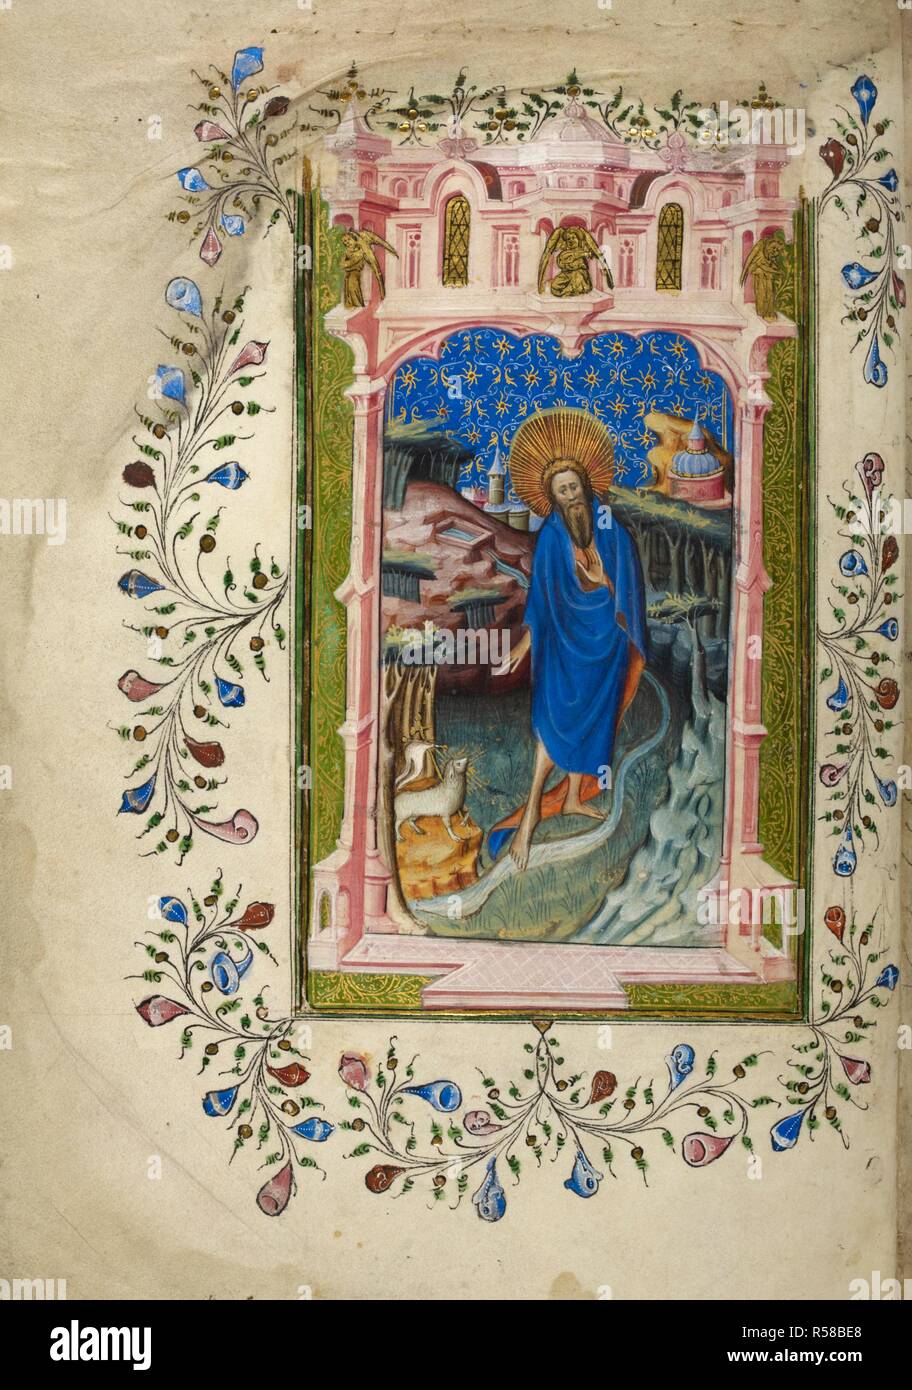 Miniature of John the Baptist, with Agnus Dei . Added prayers to saints. England, S. E. (London) and Netherlands, S. (Bruges); after 1401, before 1415. Source: Royal 2 A. XVIII, f.3v. Language: Latin. Stock Photo